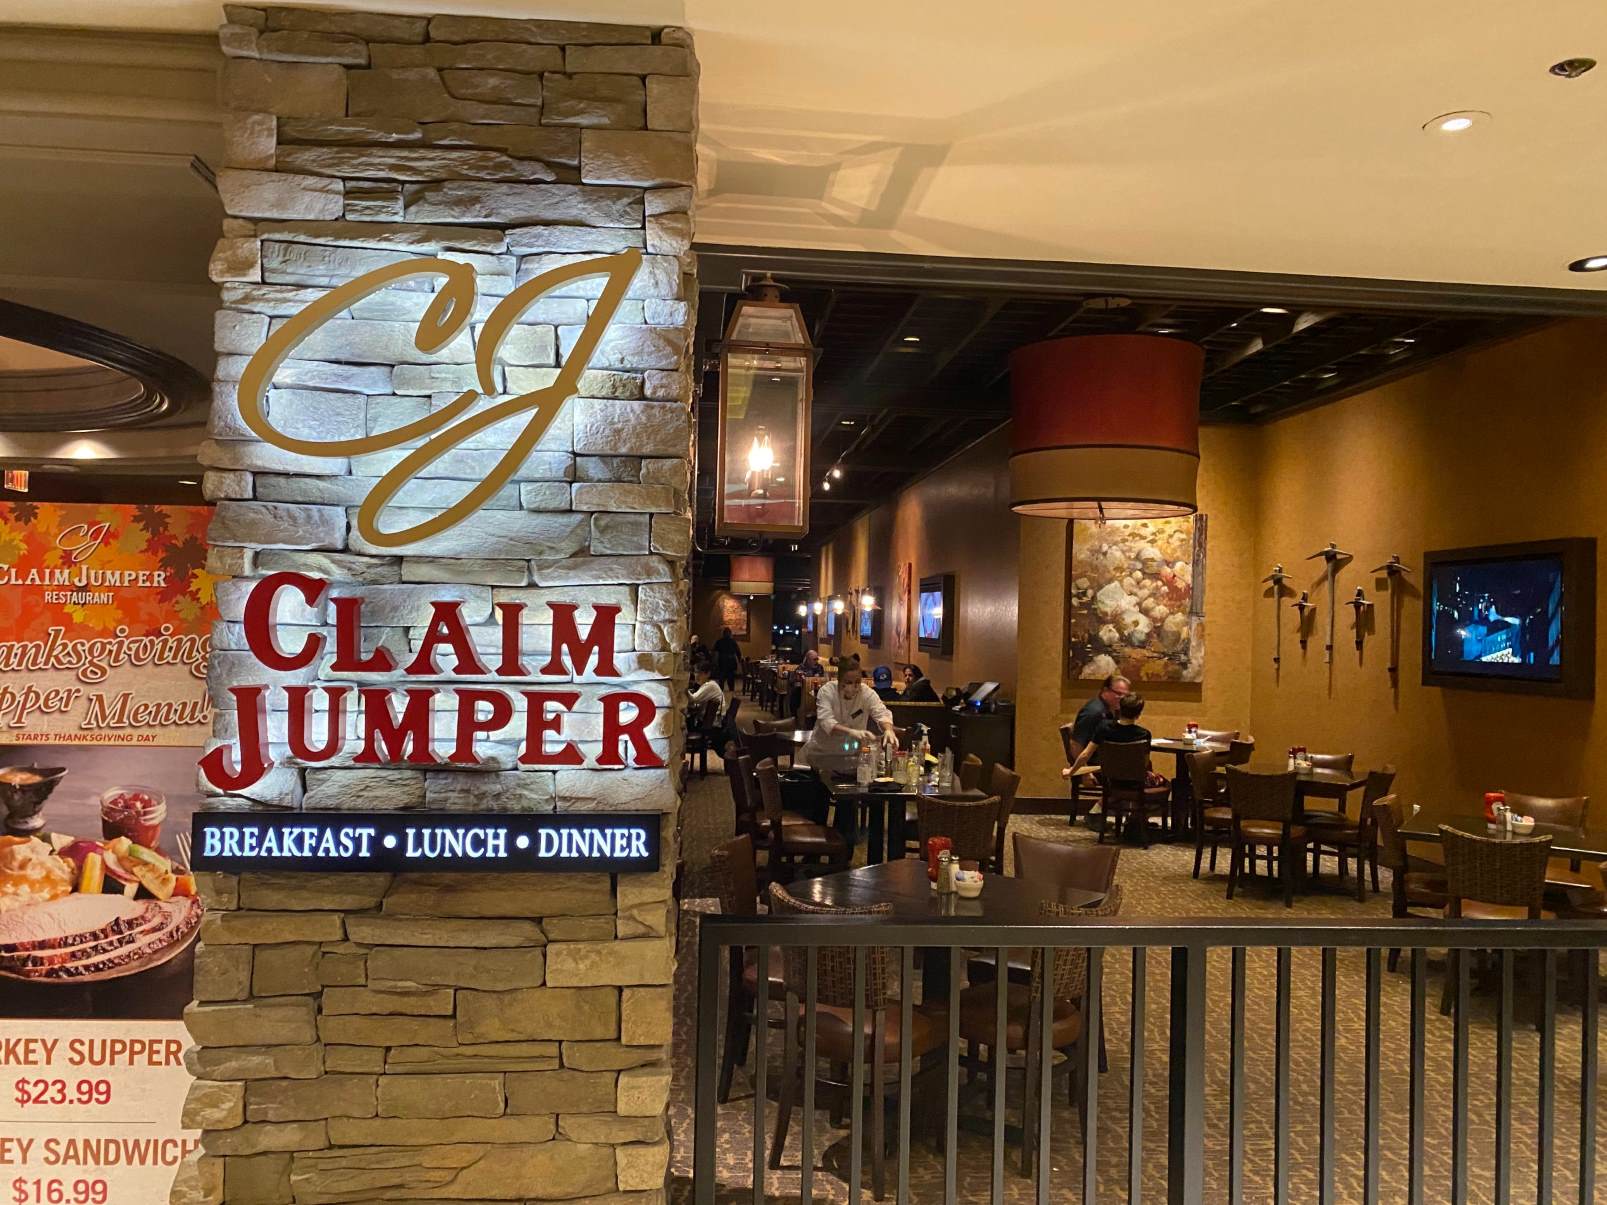 18-claim-jumper-nutritional-facts